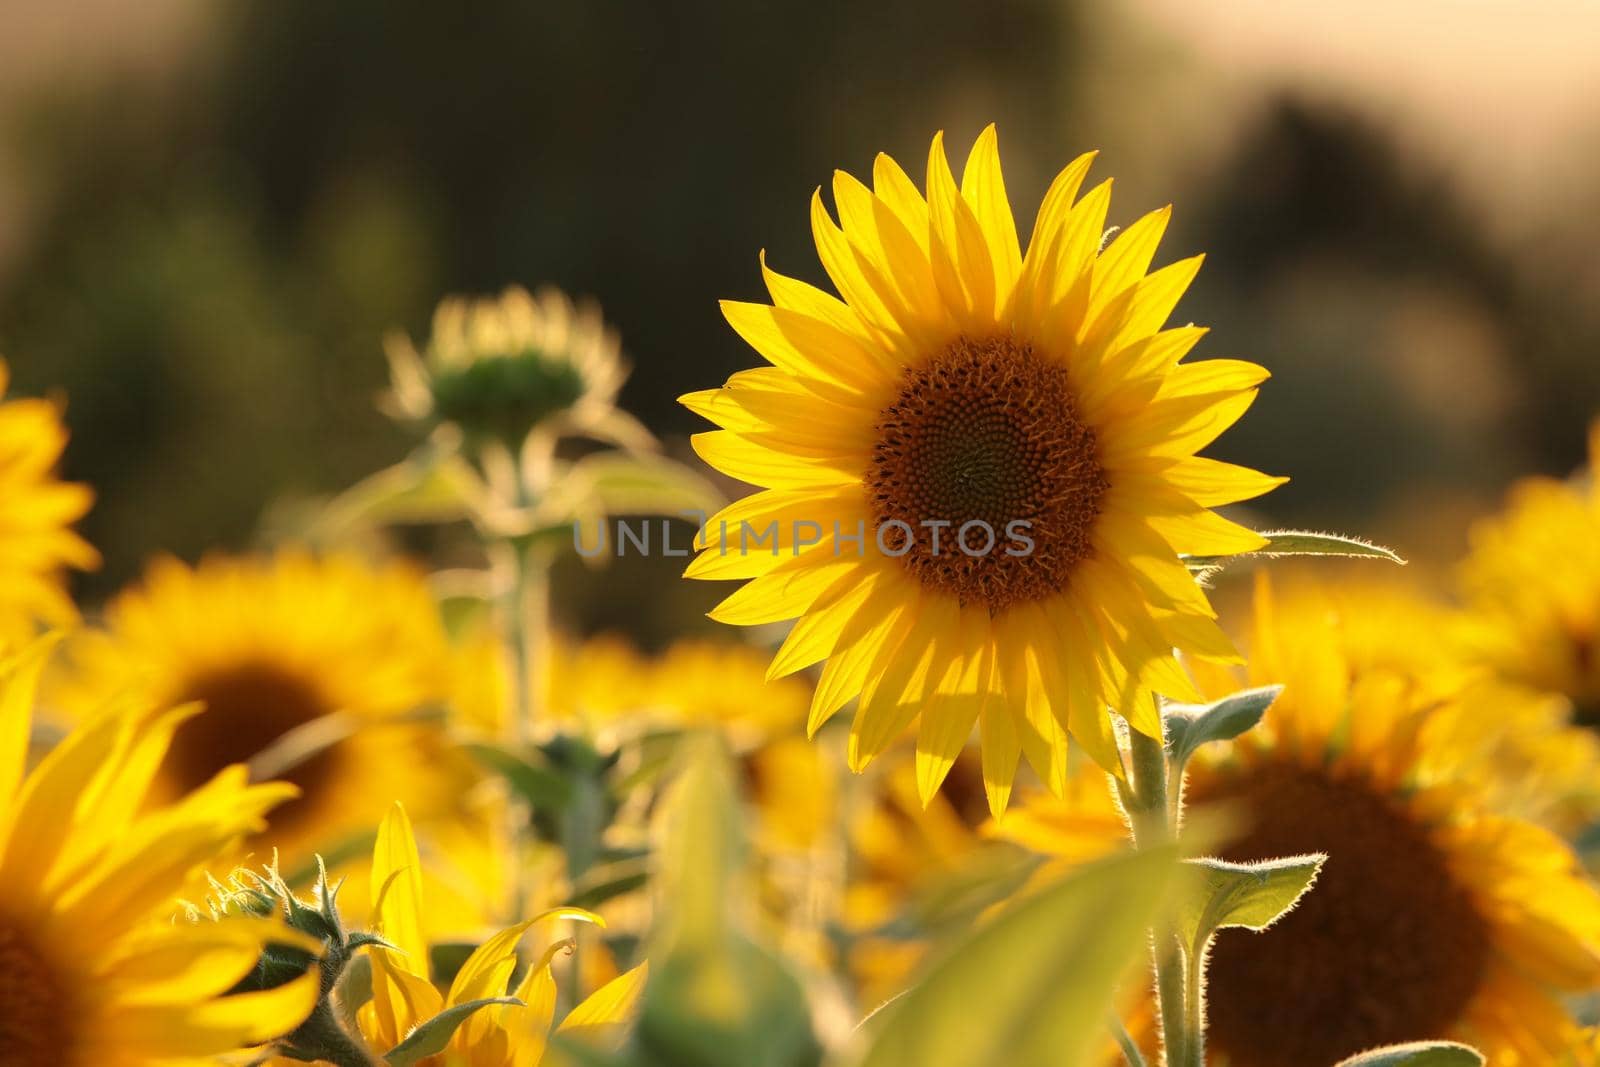 Sunflower - Helianthus annuus in the field at dusk